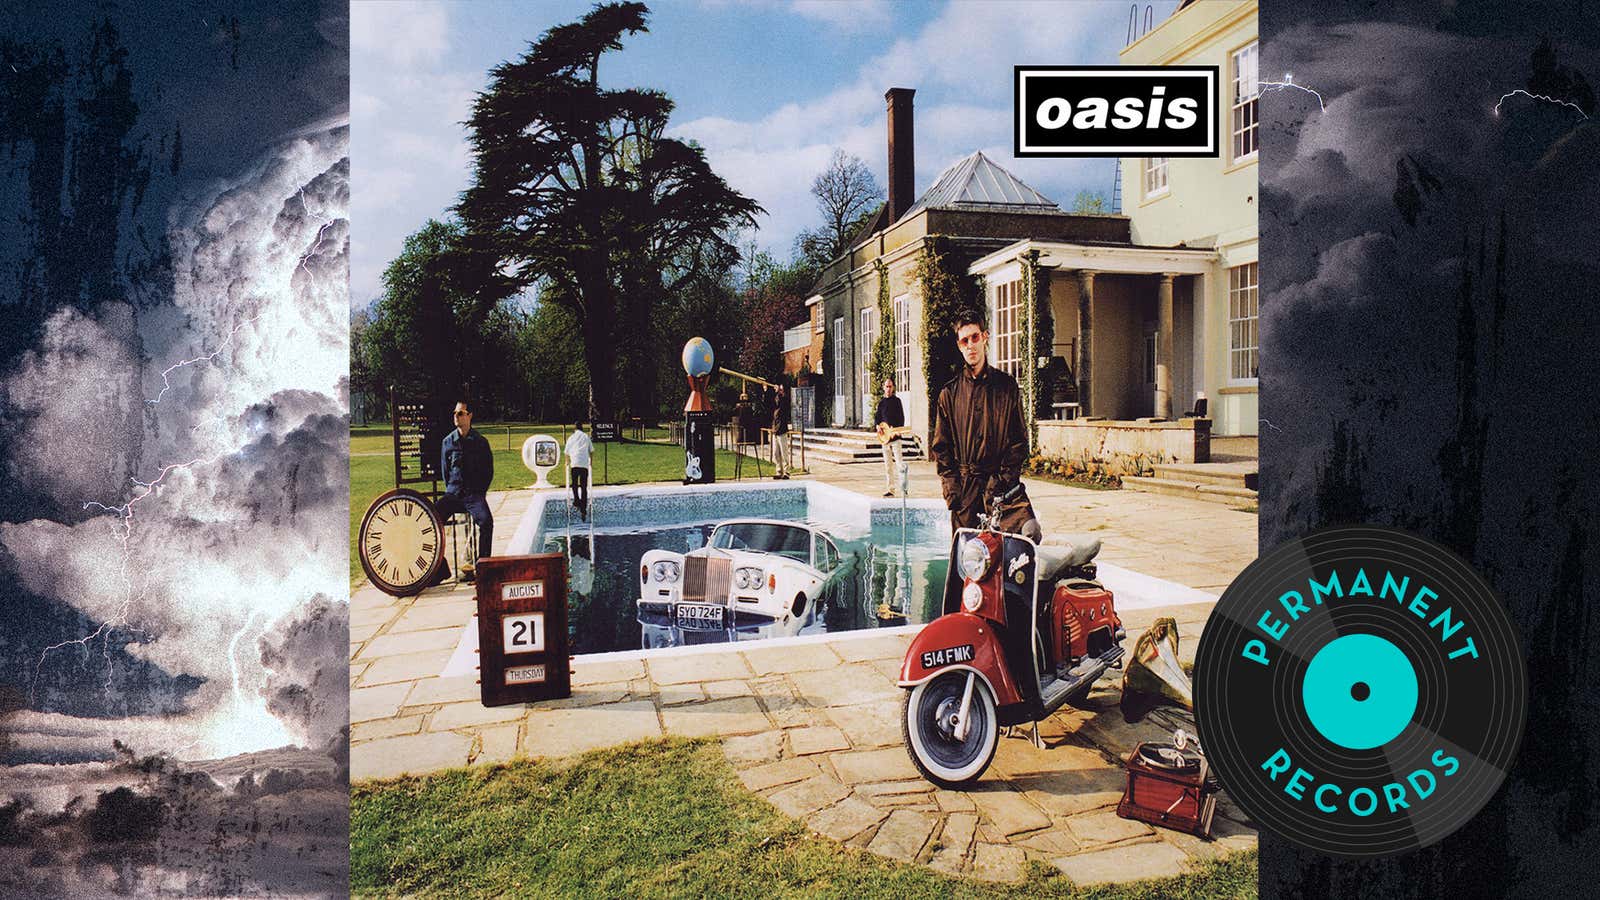 You can’t get more Oasis than the gloriously overproduced hubris of <i>Be Here Now</i>